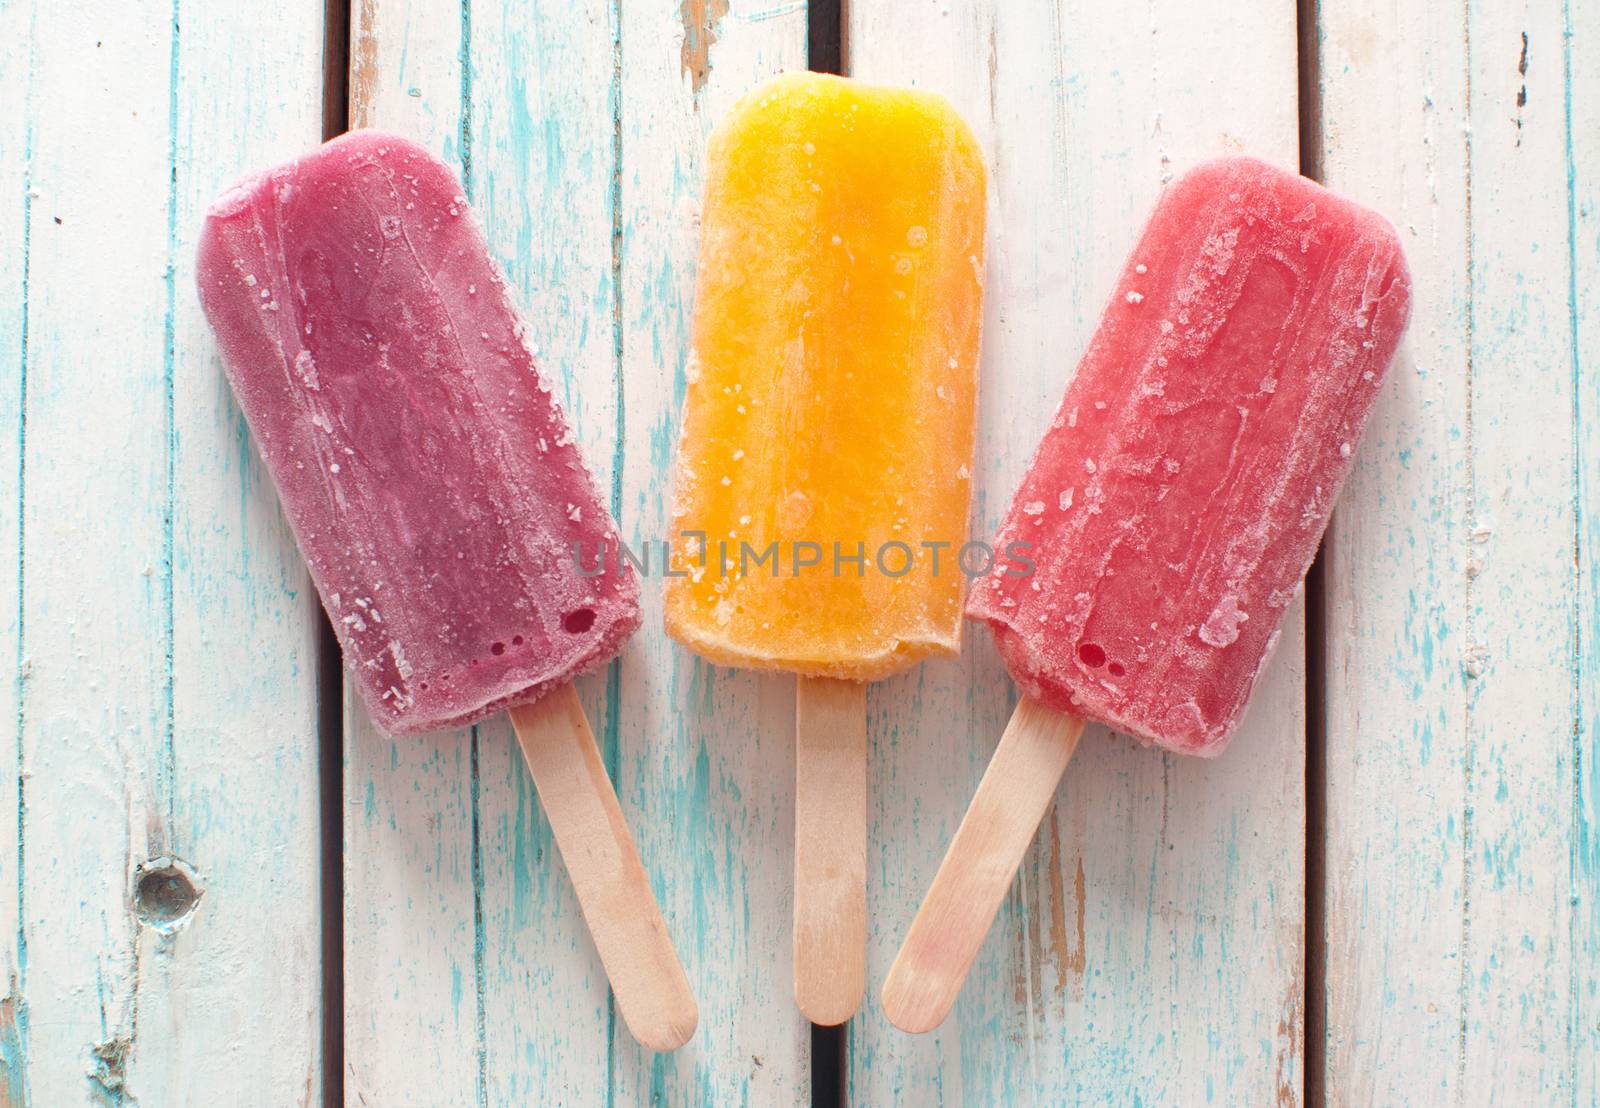 Assorted flavored ice popsicles